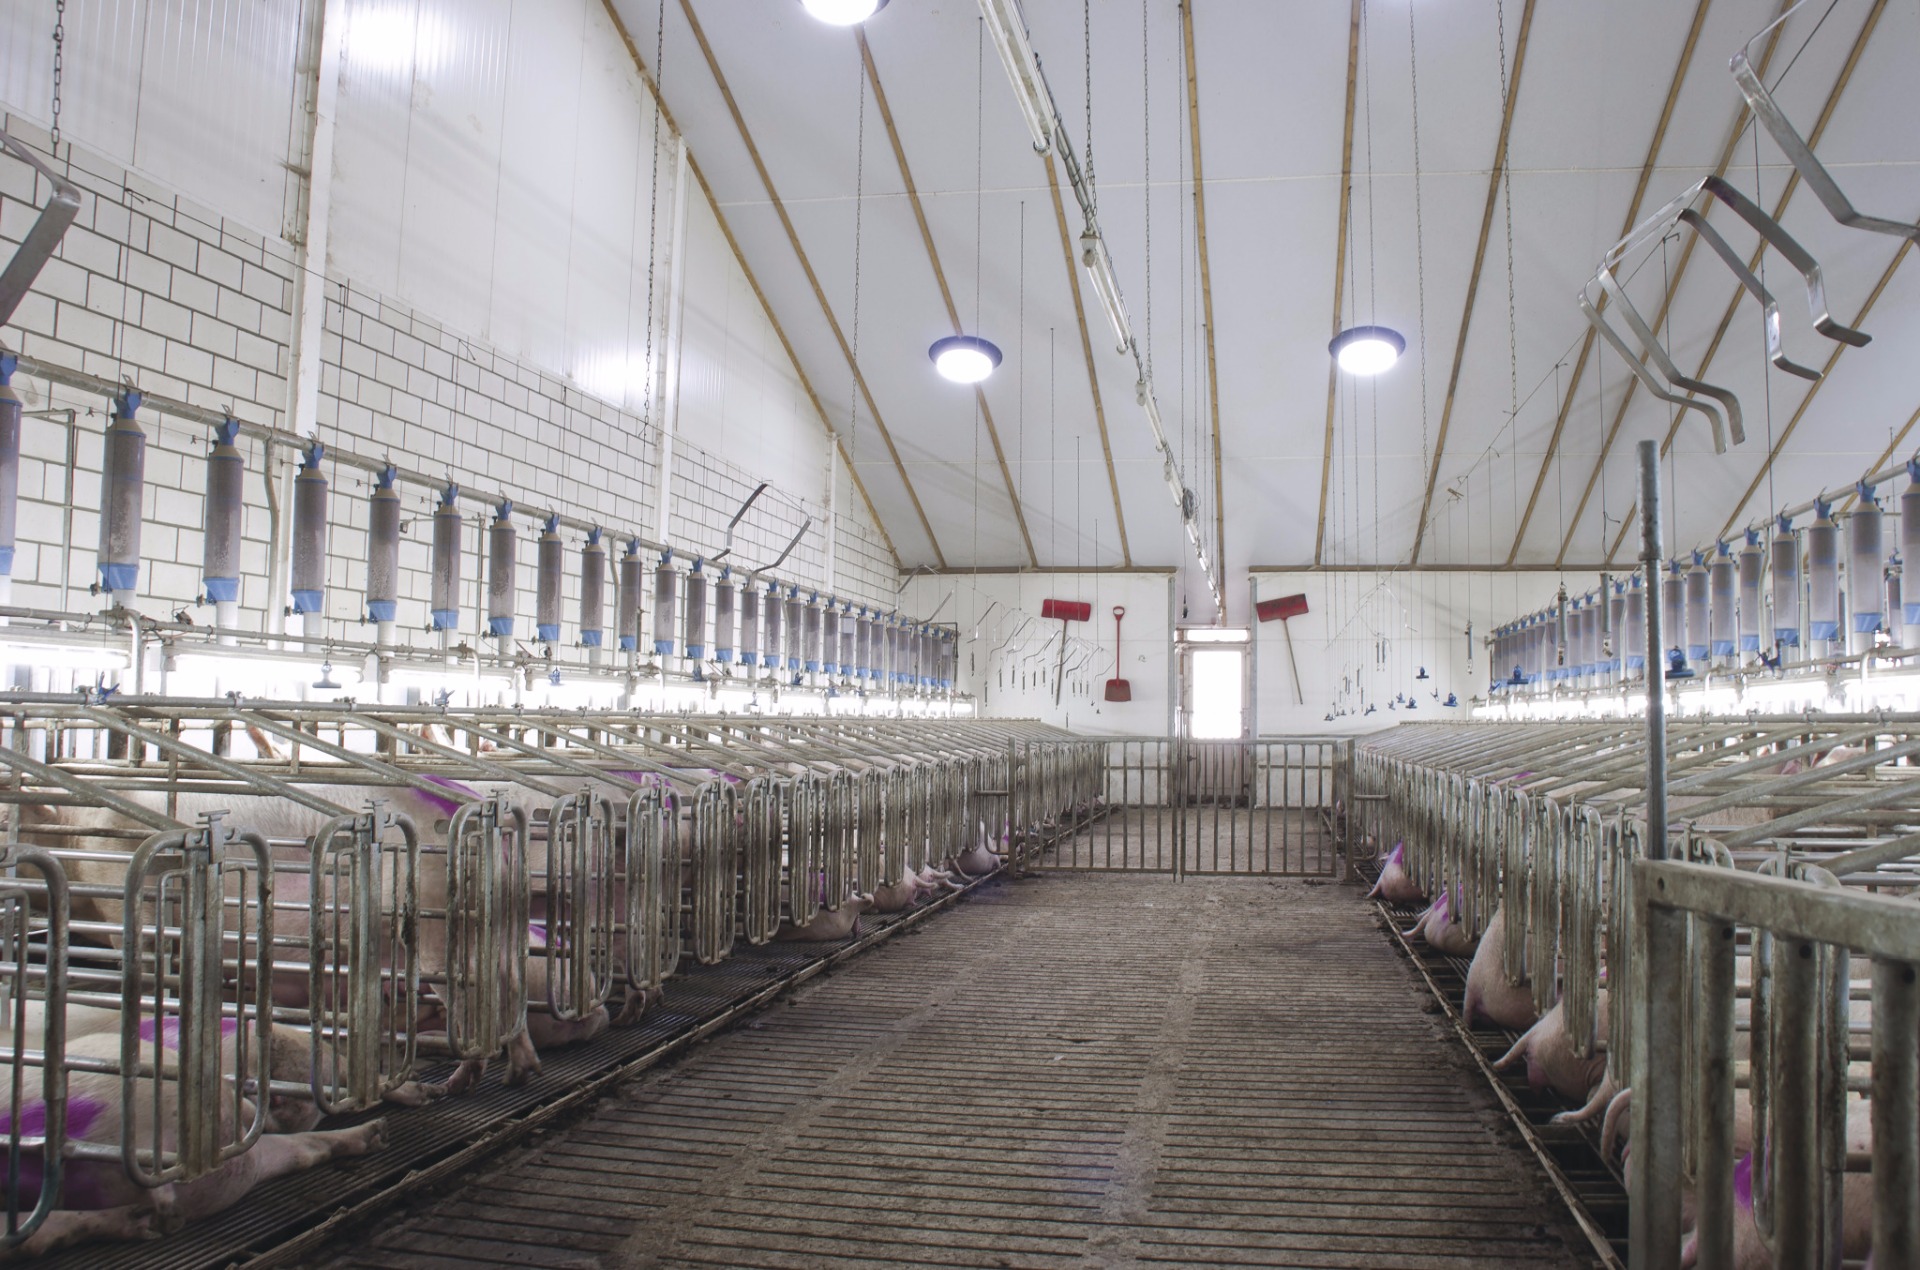 Pig Stable in Leunen The Netherlands with installed daylighting systems in the roof